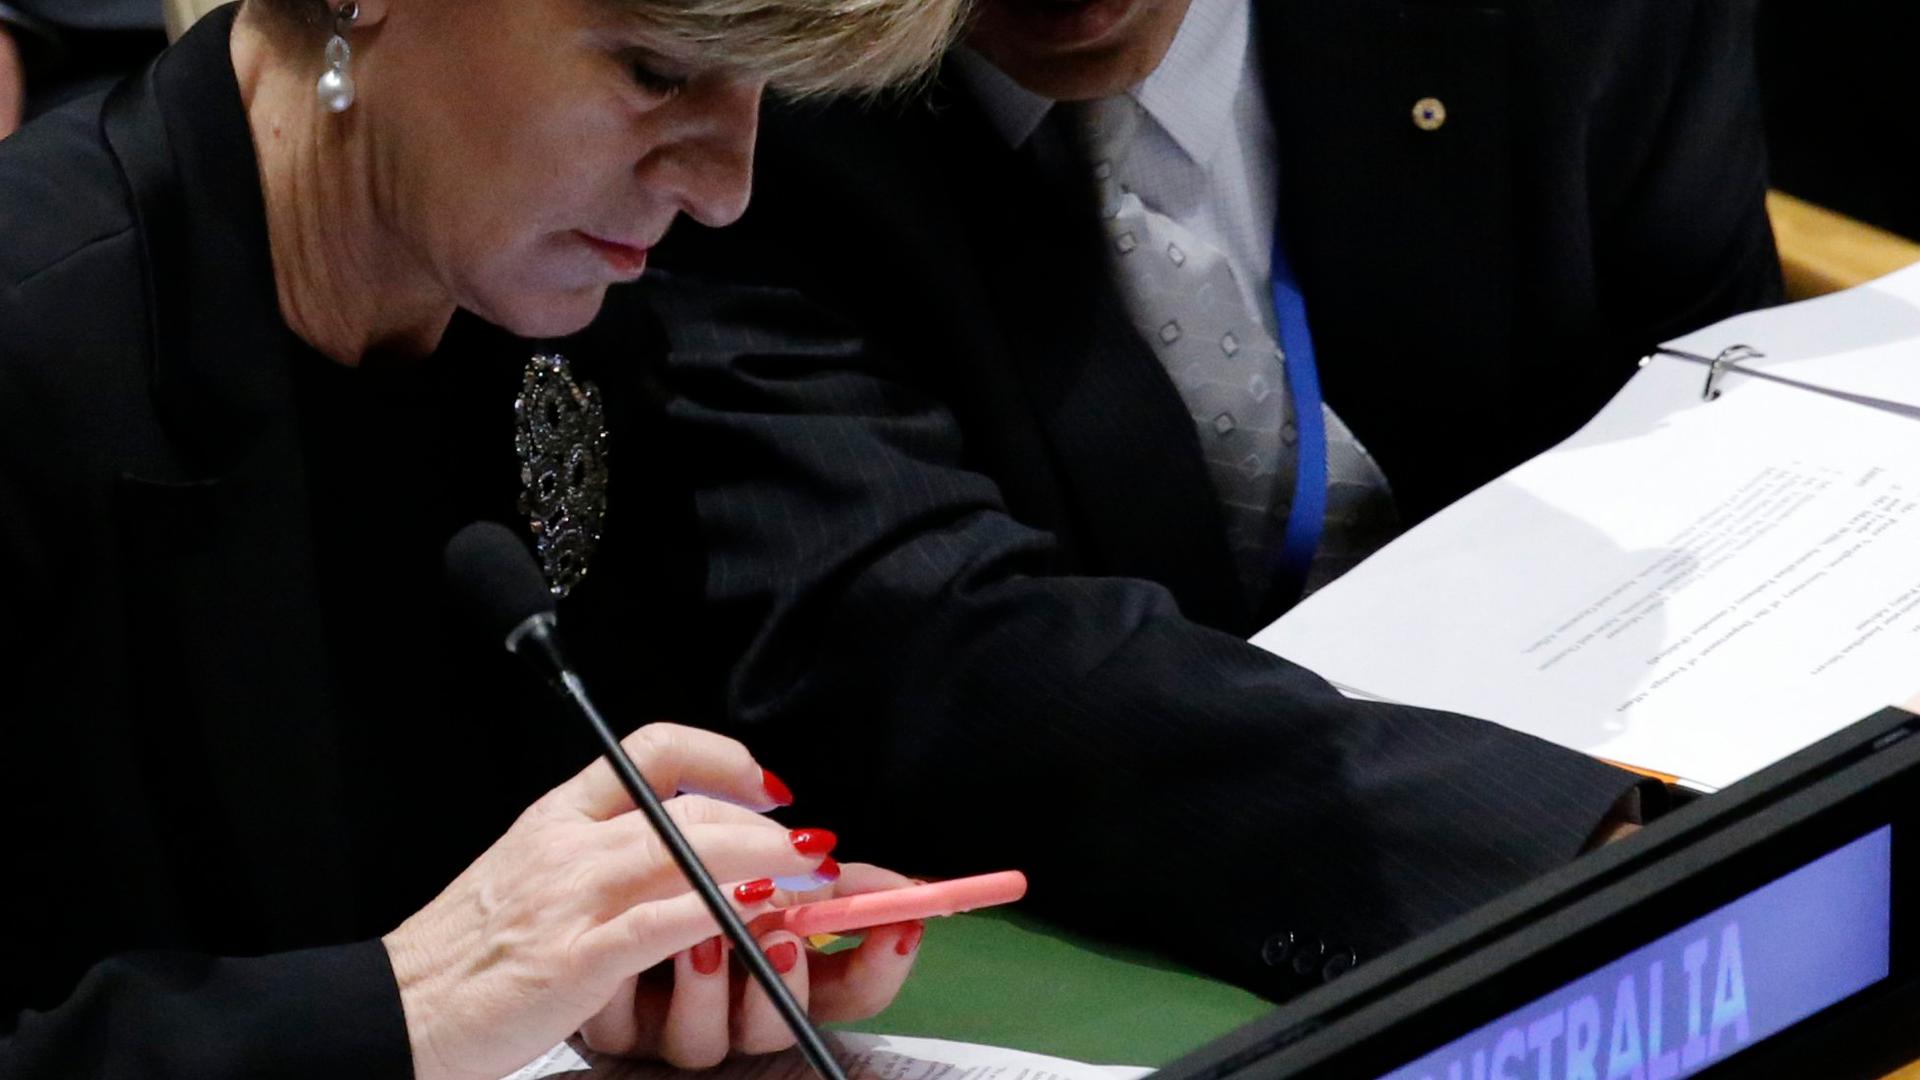 Australian Minister for Foreign Affairs Julie Bishop confers with a member of her delegation during the 70th session of the United Nations General Assembly at the U.N. headquarters in Manhattan, New York.